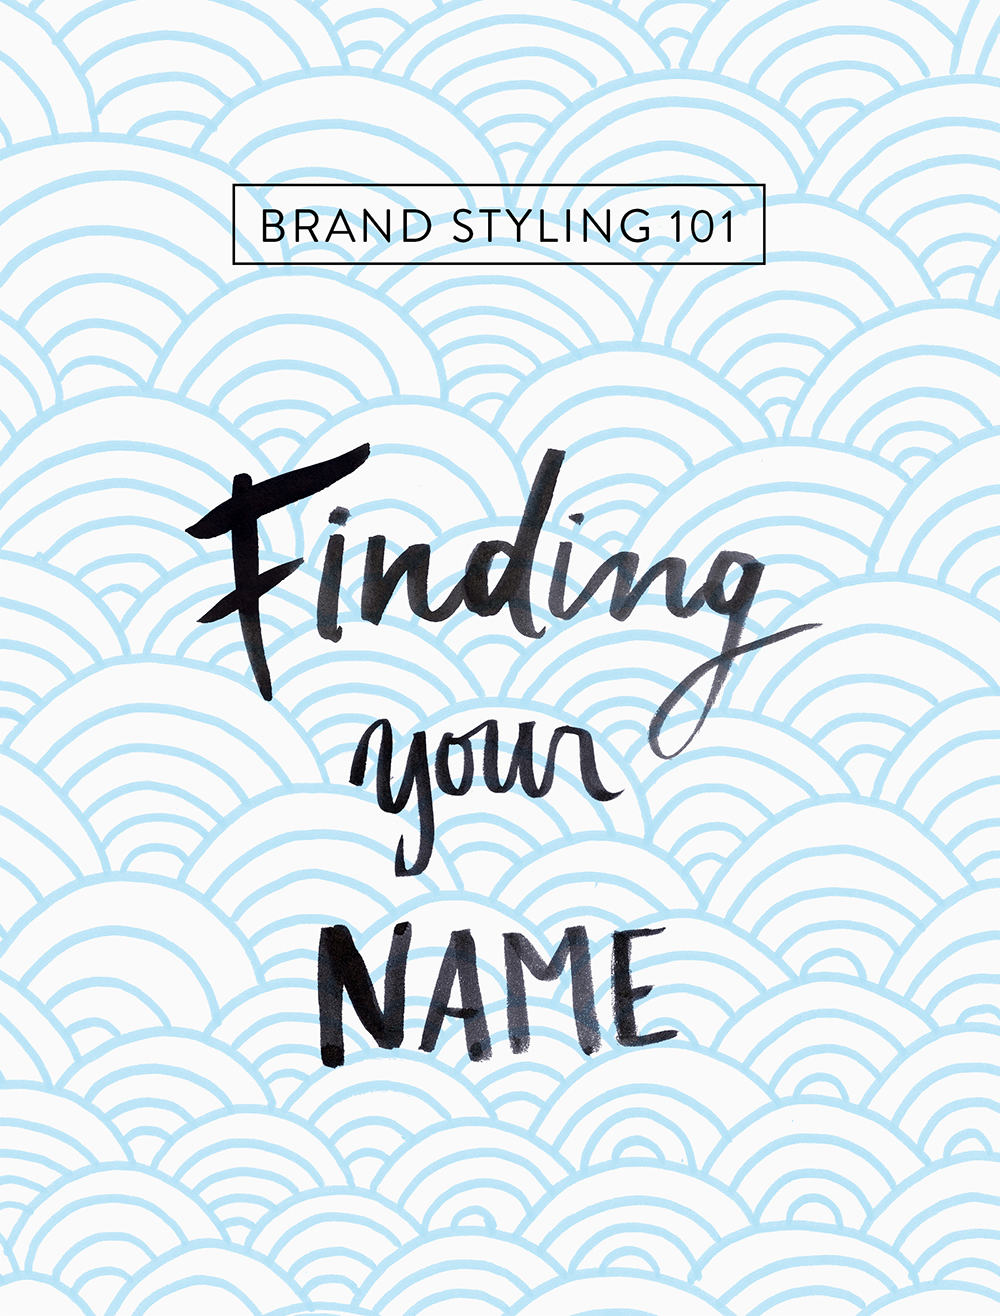 FEATURED-Brand-styling-101-namefinding